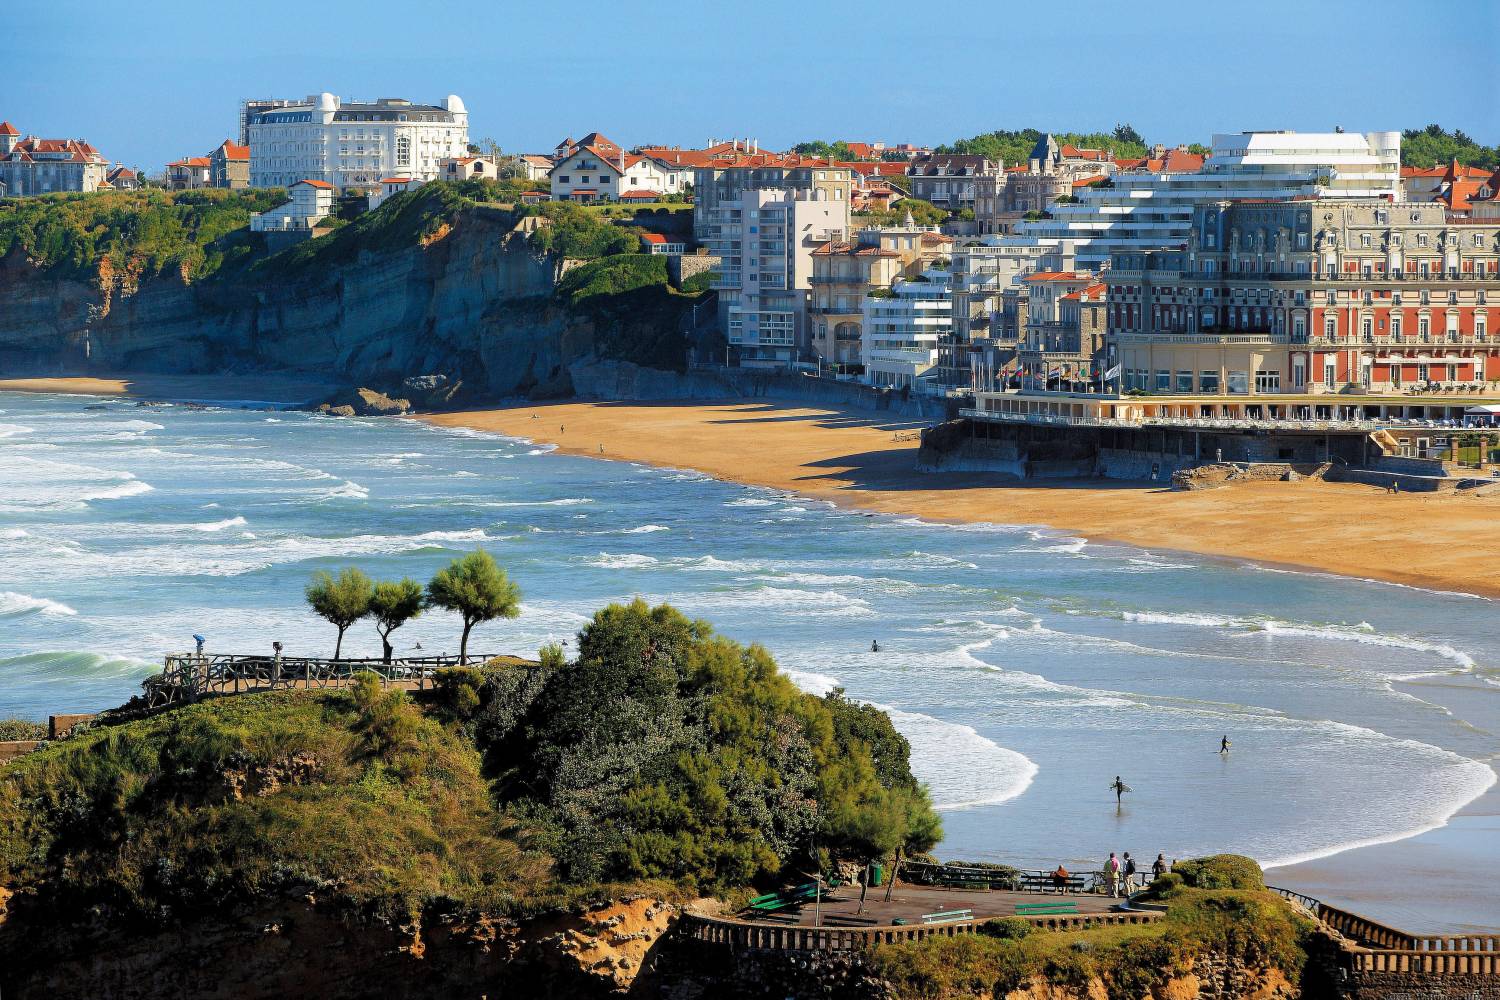 Enjoy a private chef after an amazing day in Biarritz - Take a Chef